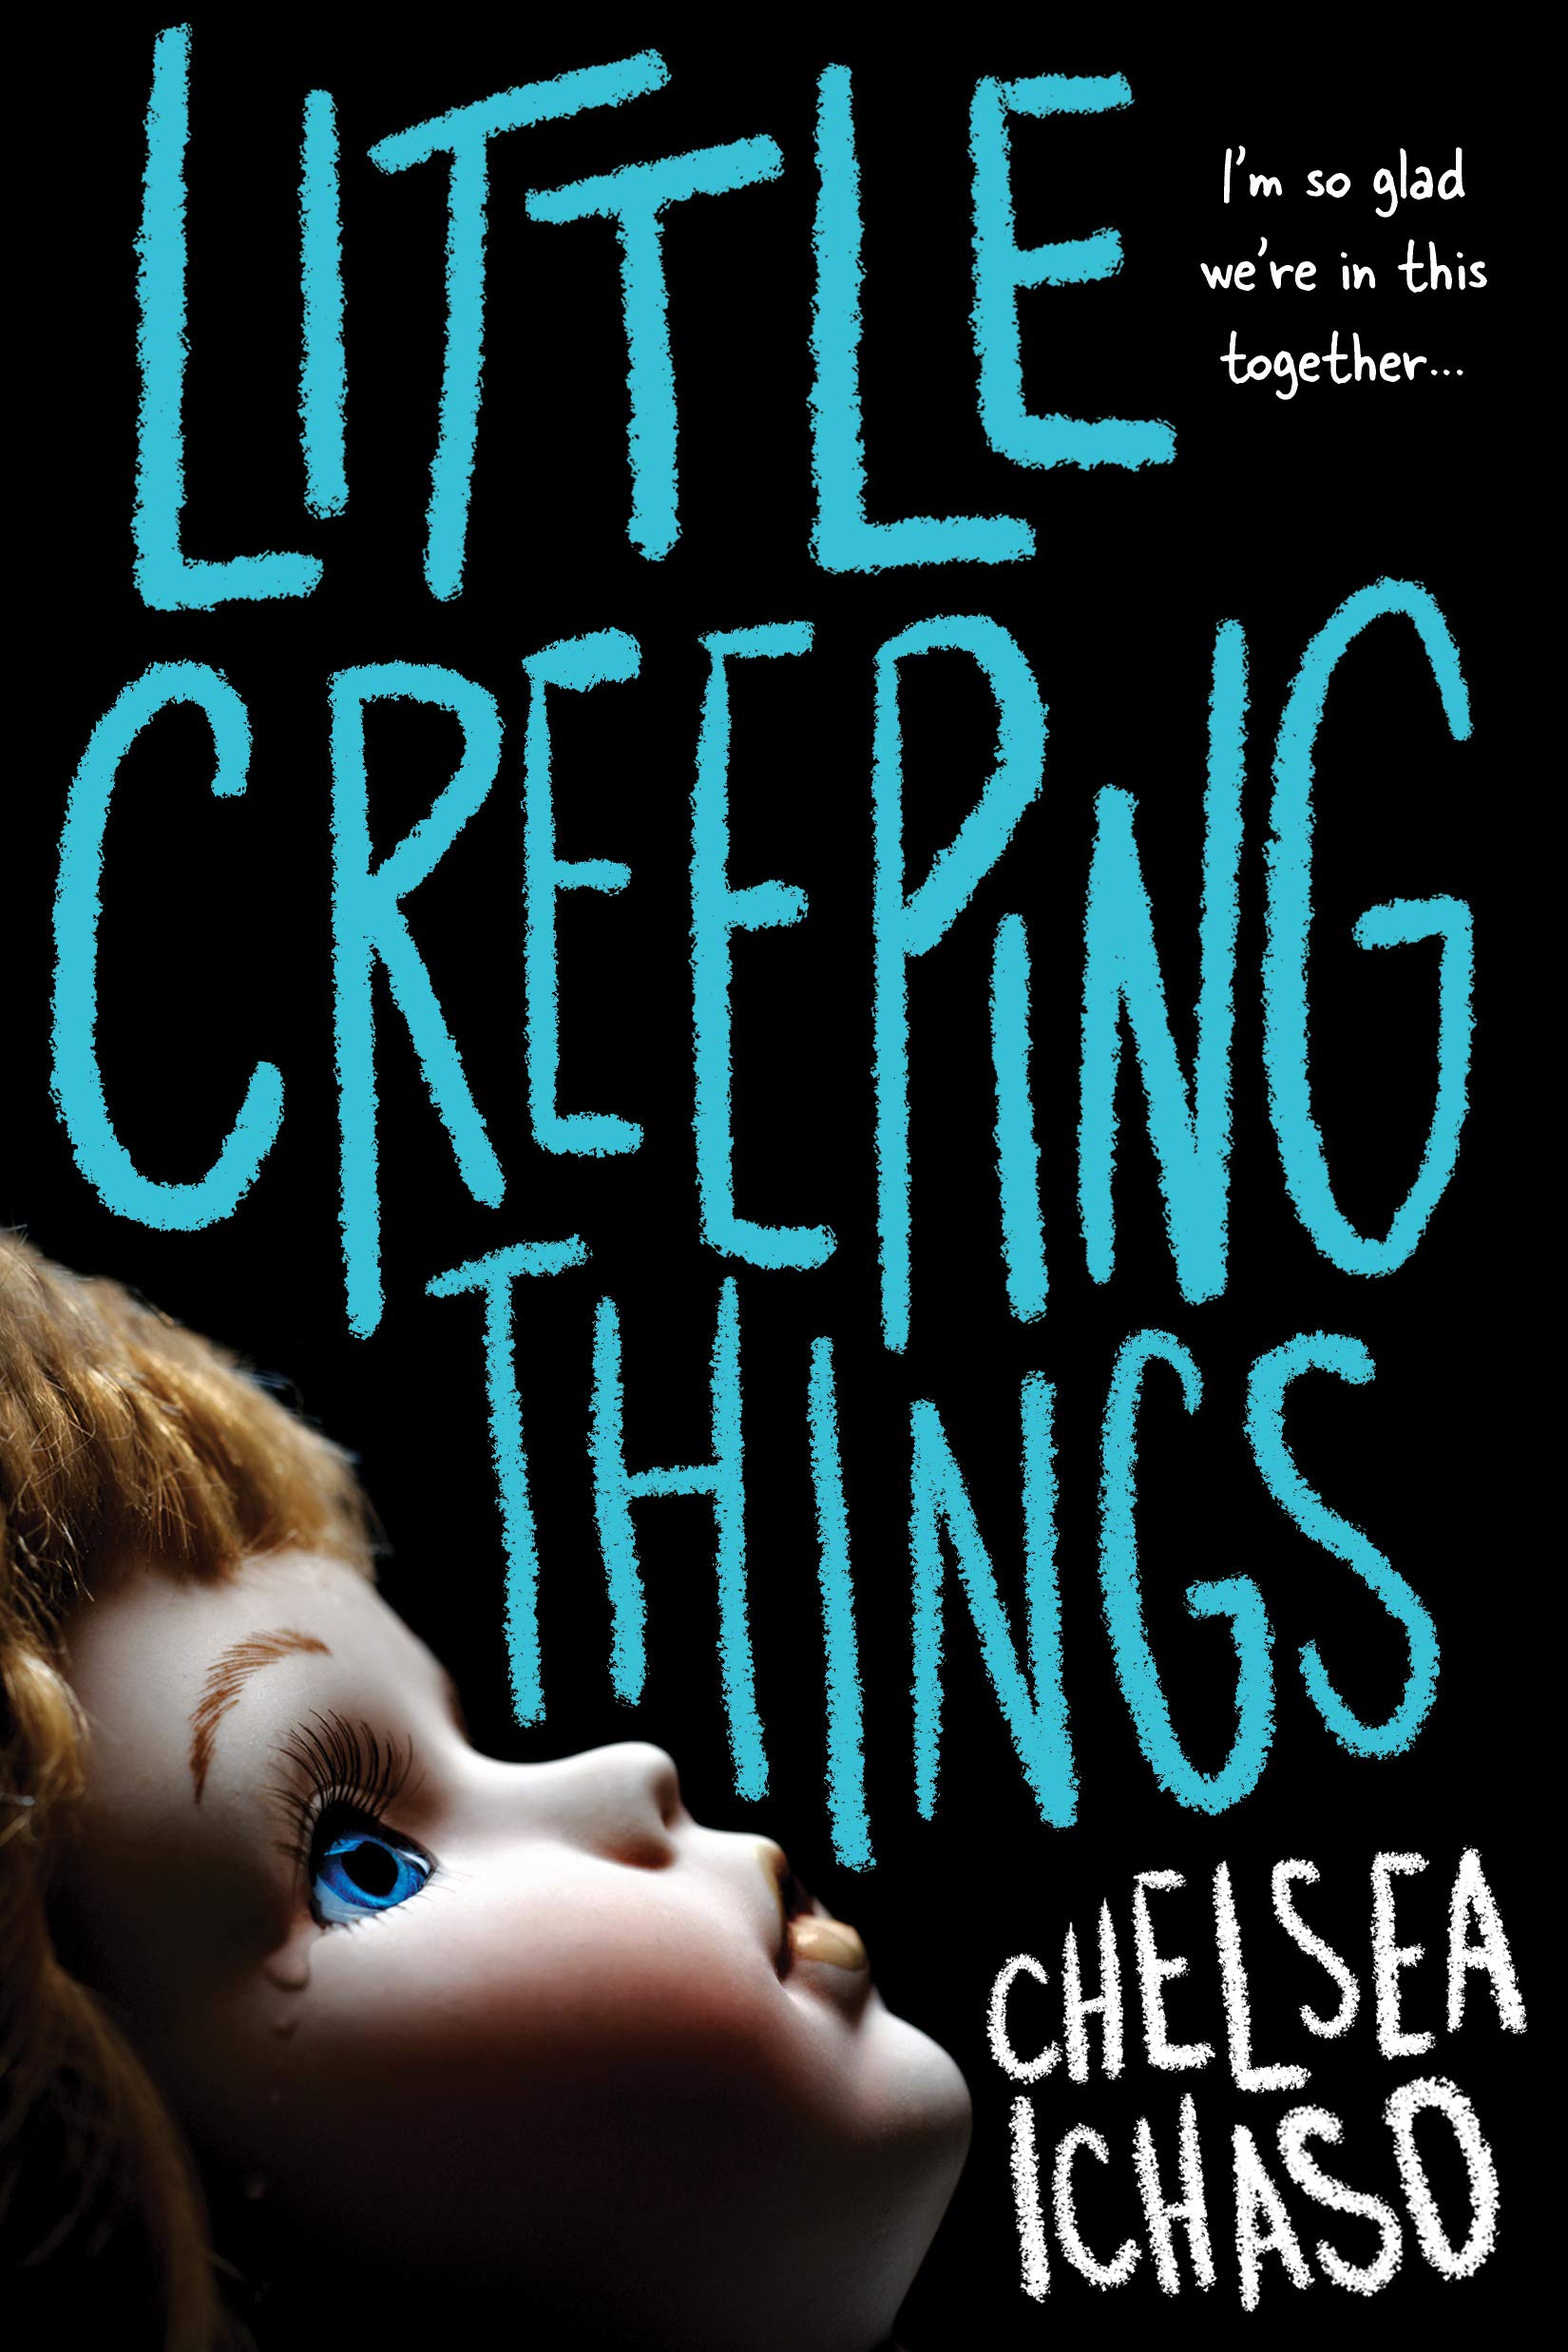 Little Creeping Things by Chelsea Ichaso